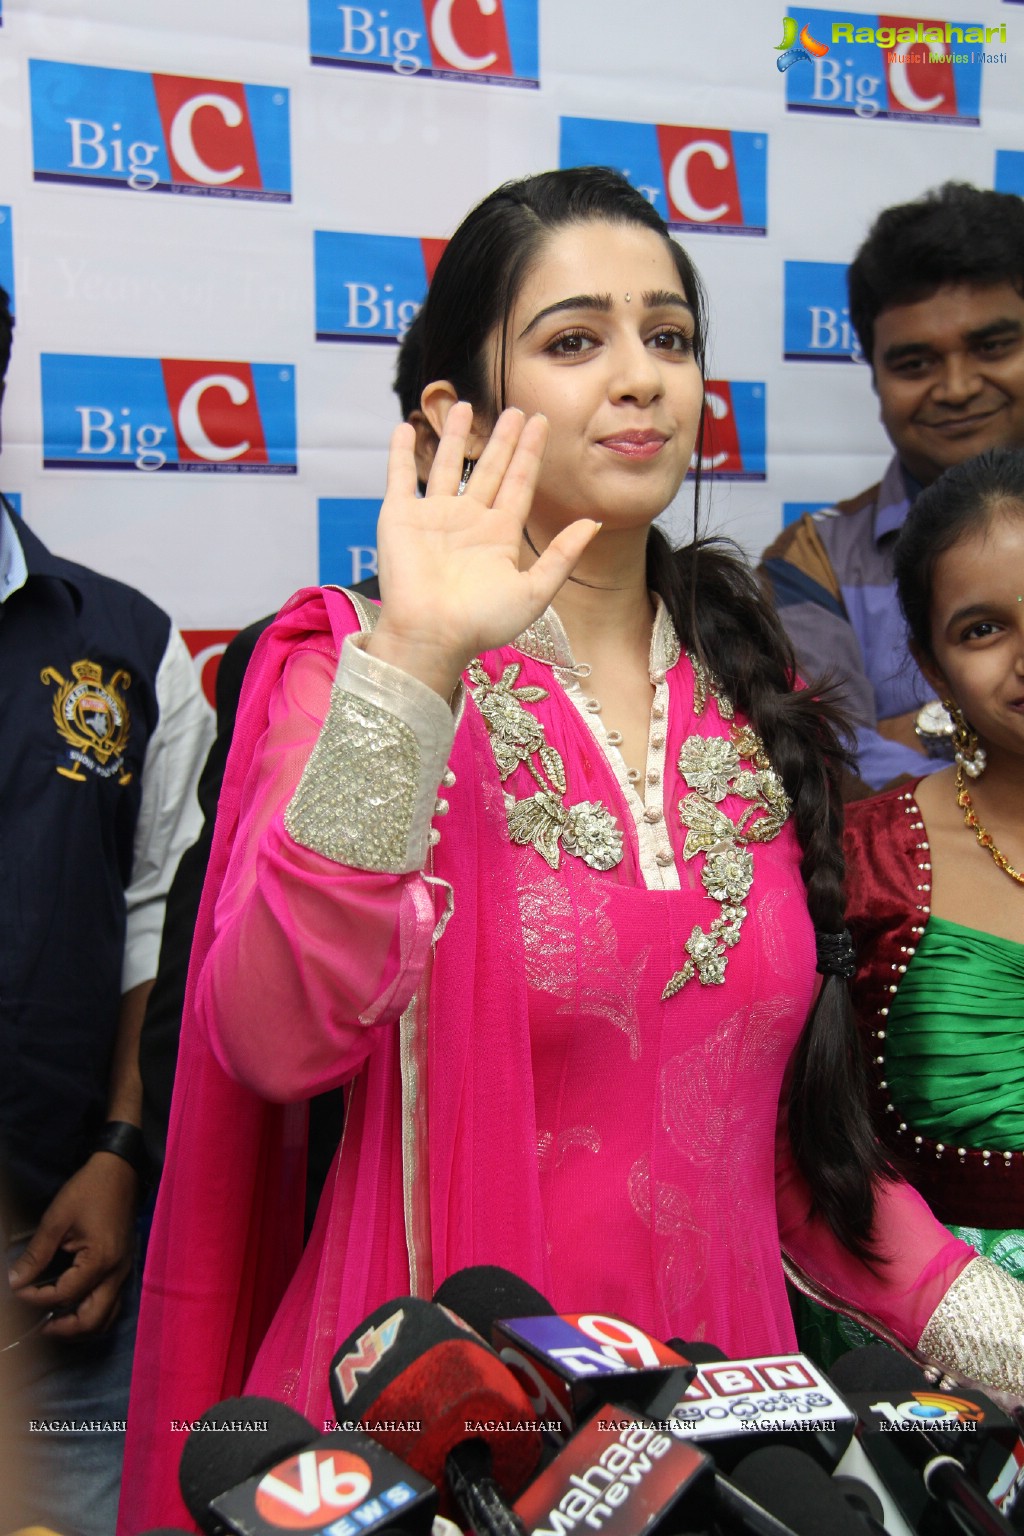 Charmme inaugurates Big C at Ameerpet, Hyderabad